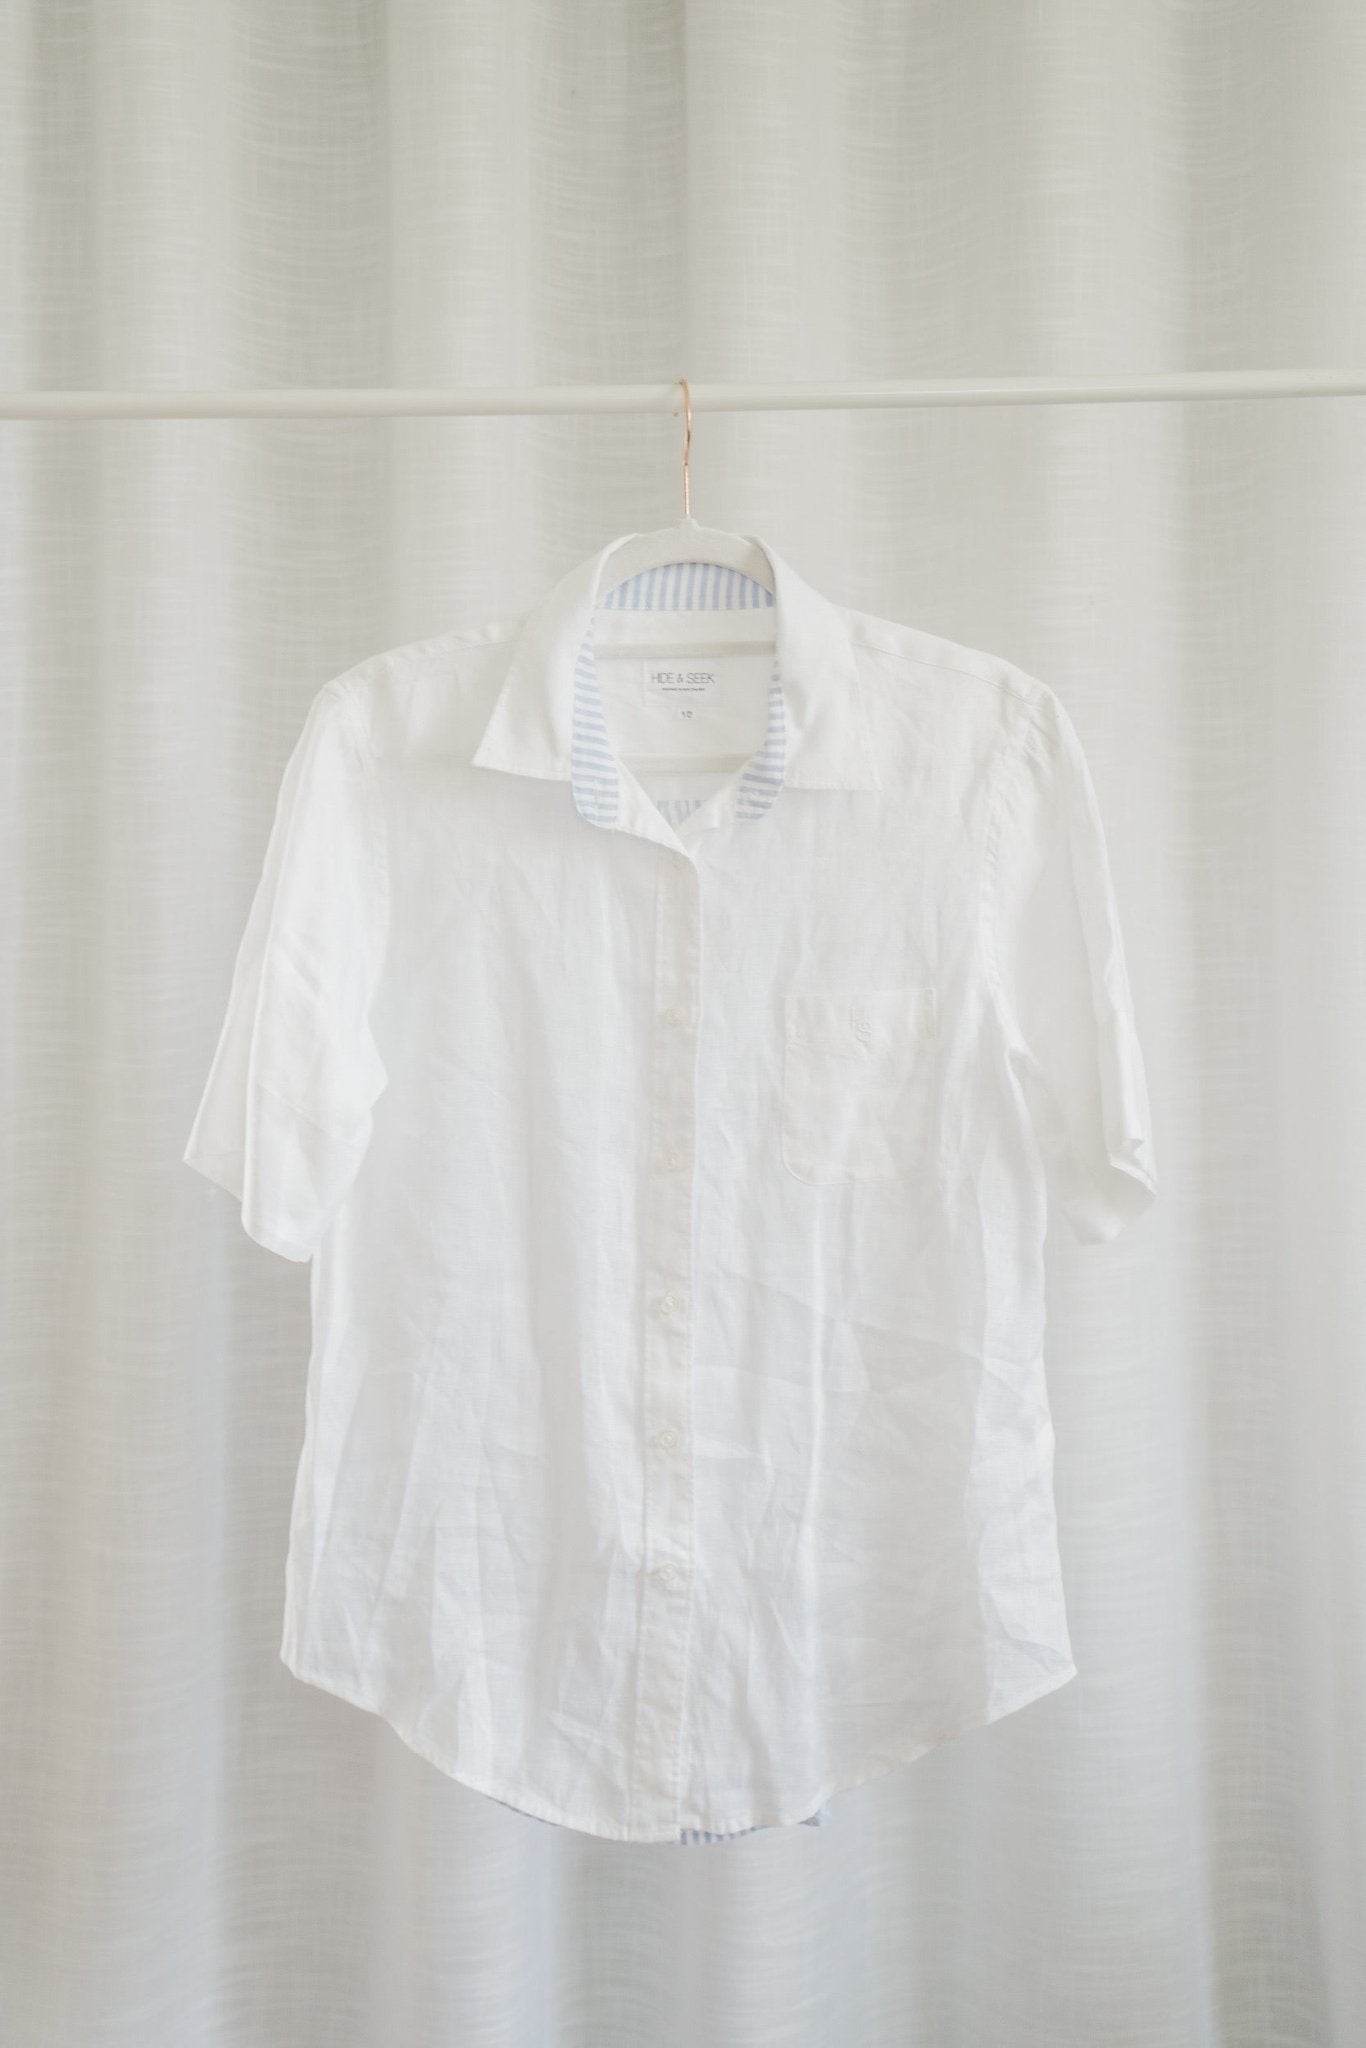 White with Stripe Back Linen Shirt - Hide and Seek Clothing